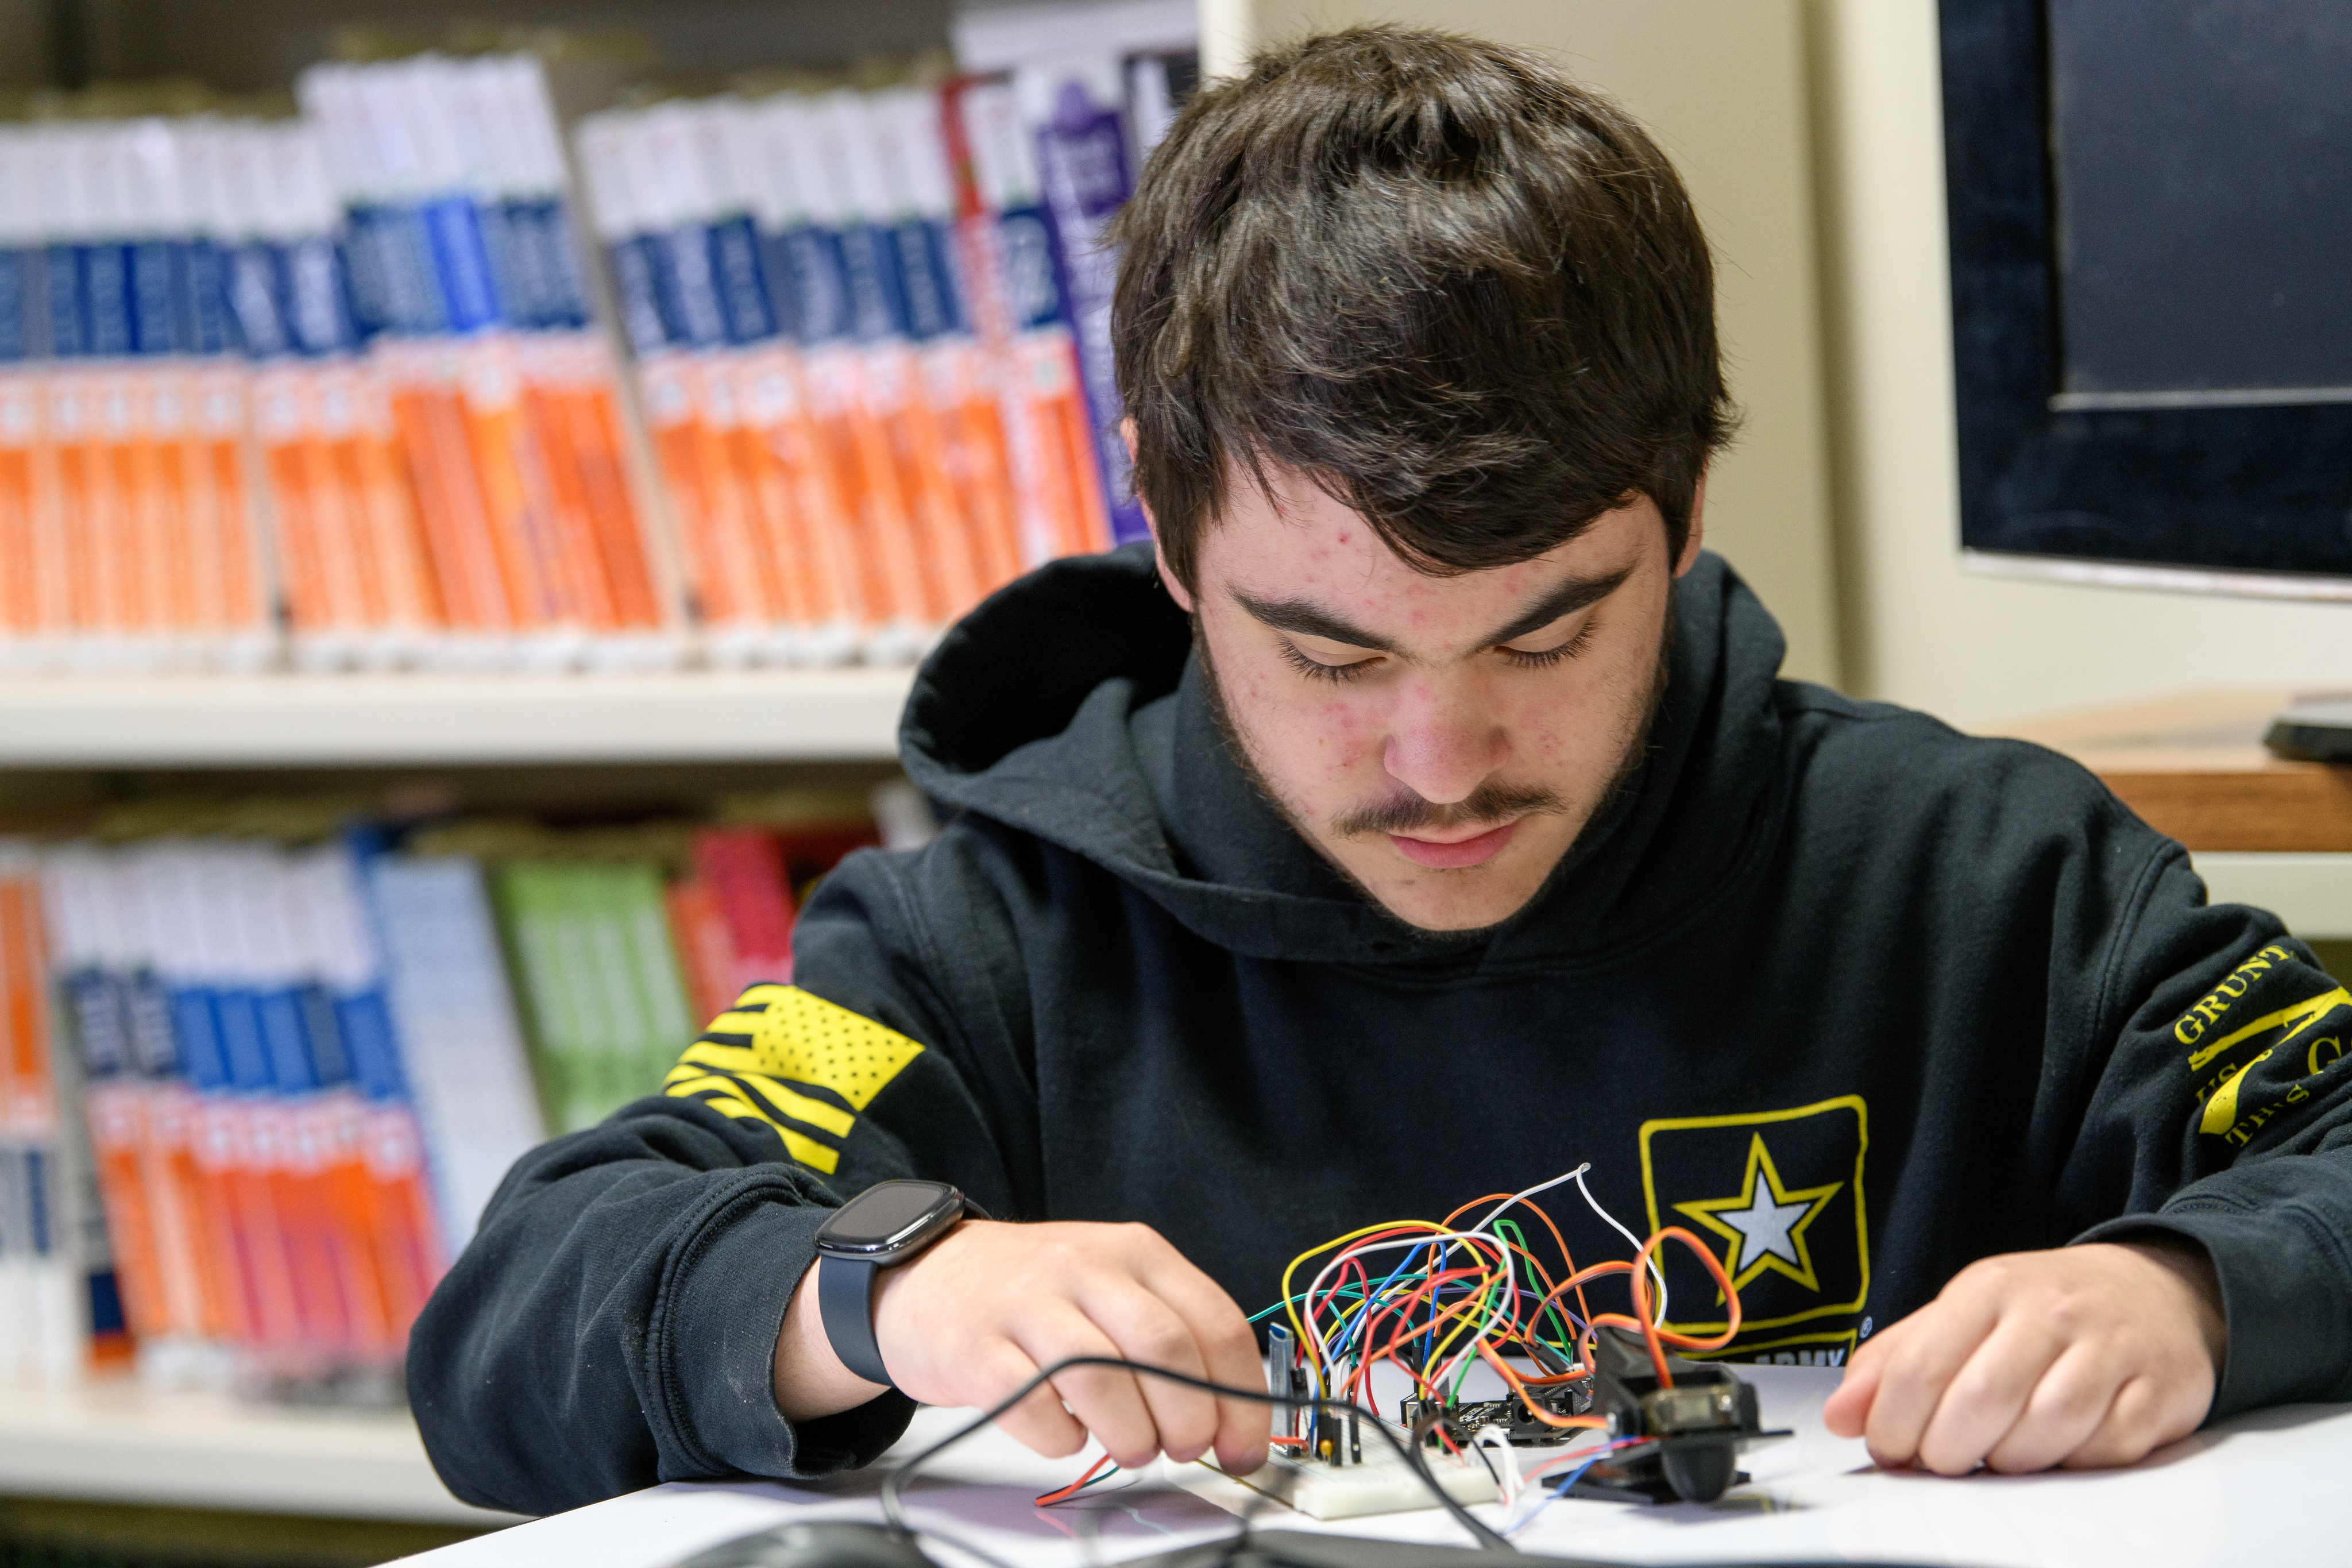 Programming student works on wiring a device.